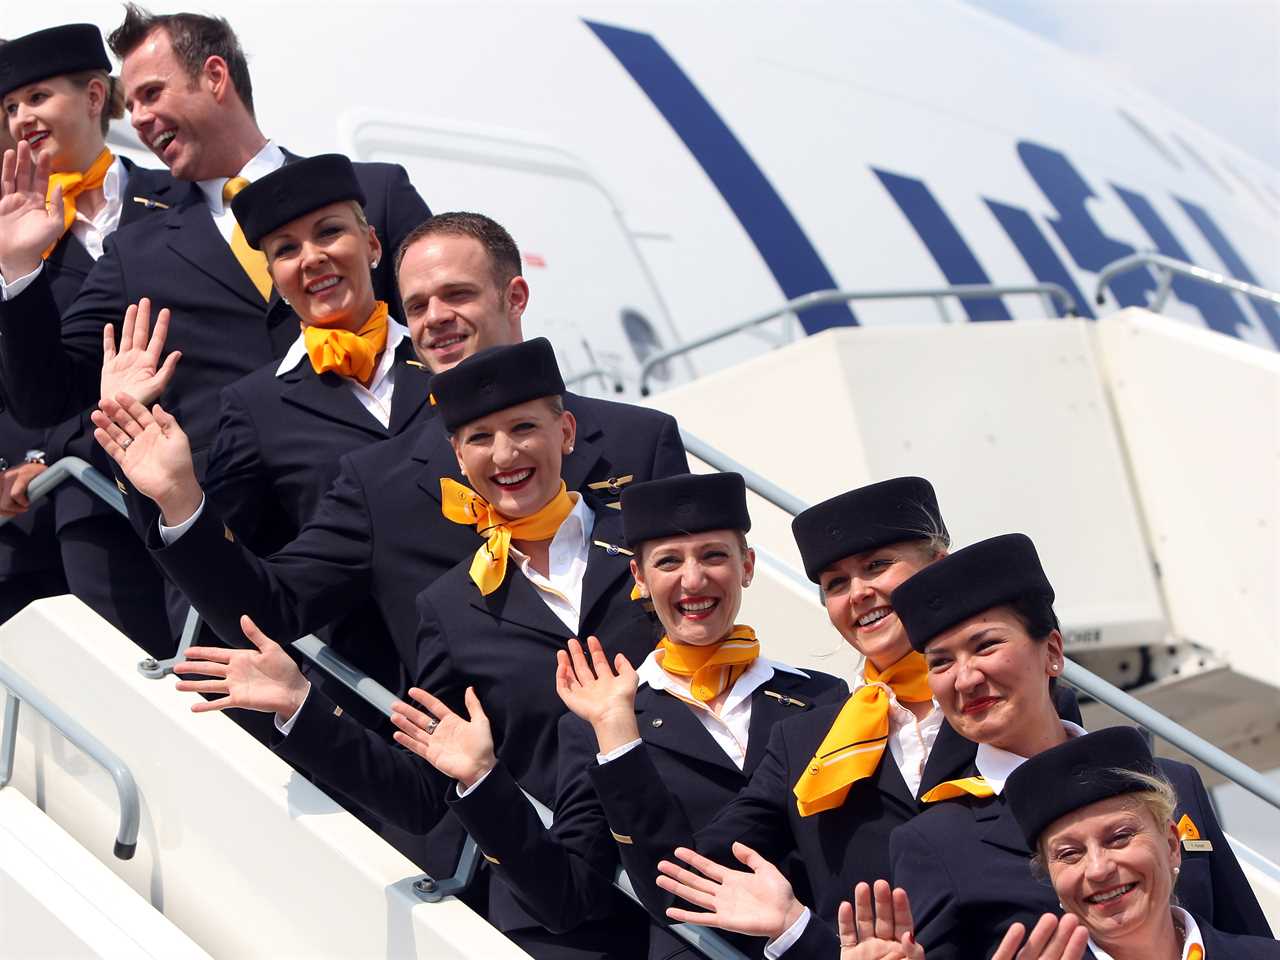 Flight attendants wave in hats and scarves in 2012.